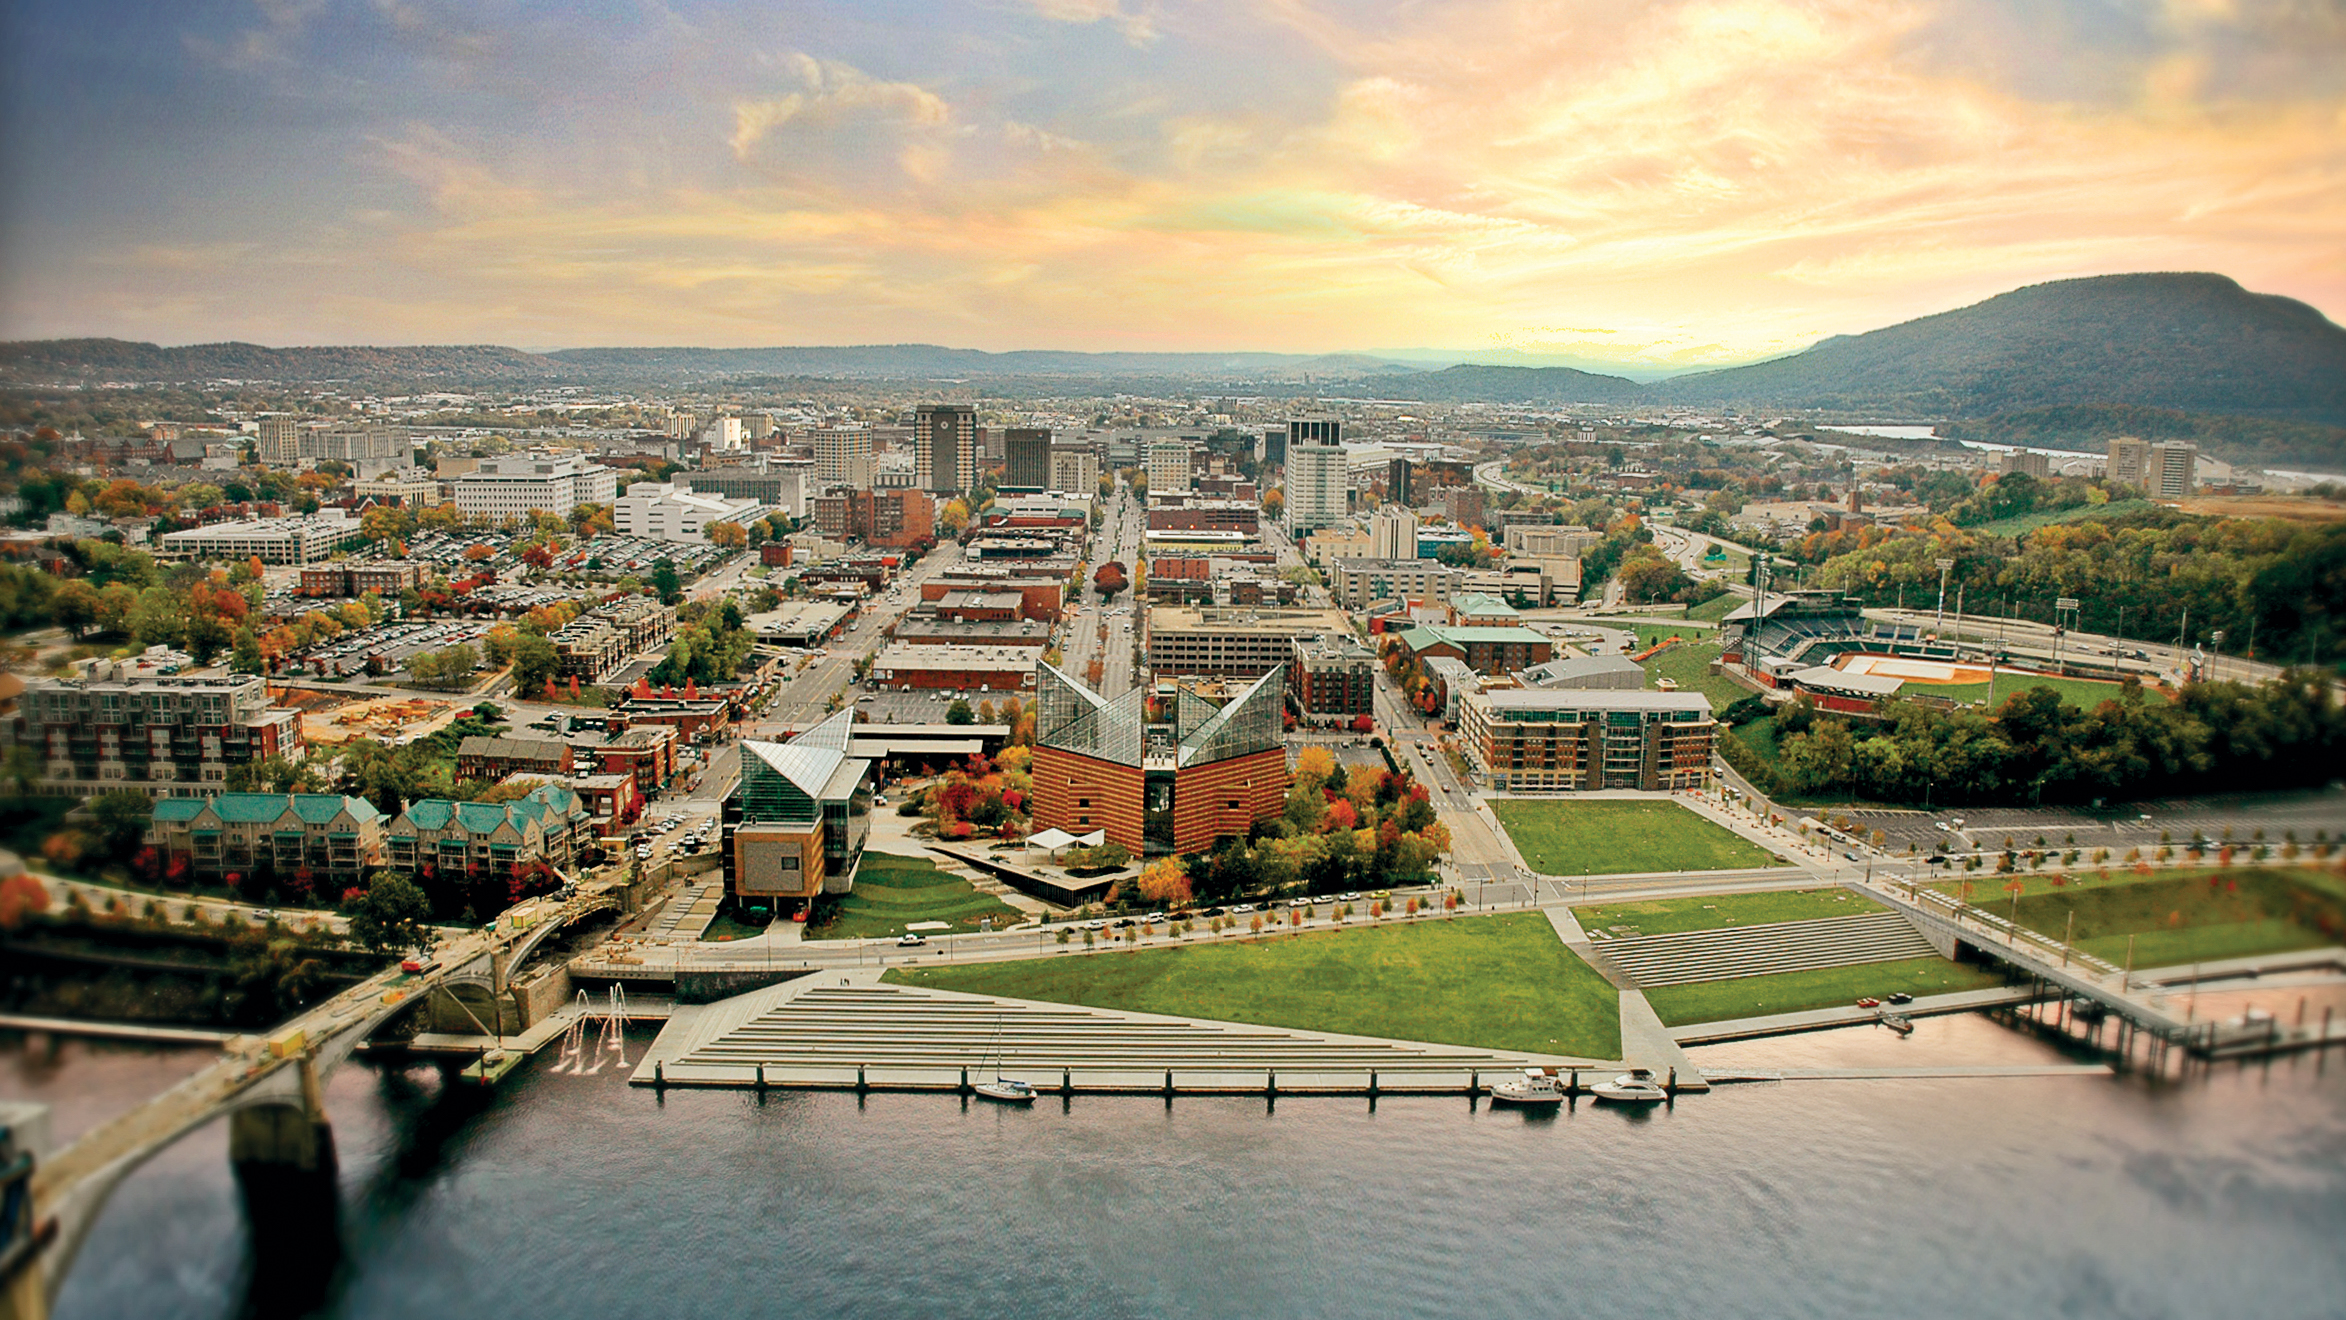 Find things to do in Chattanooga and other favorite towns of the Southeast United States!